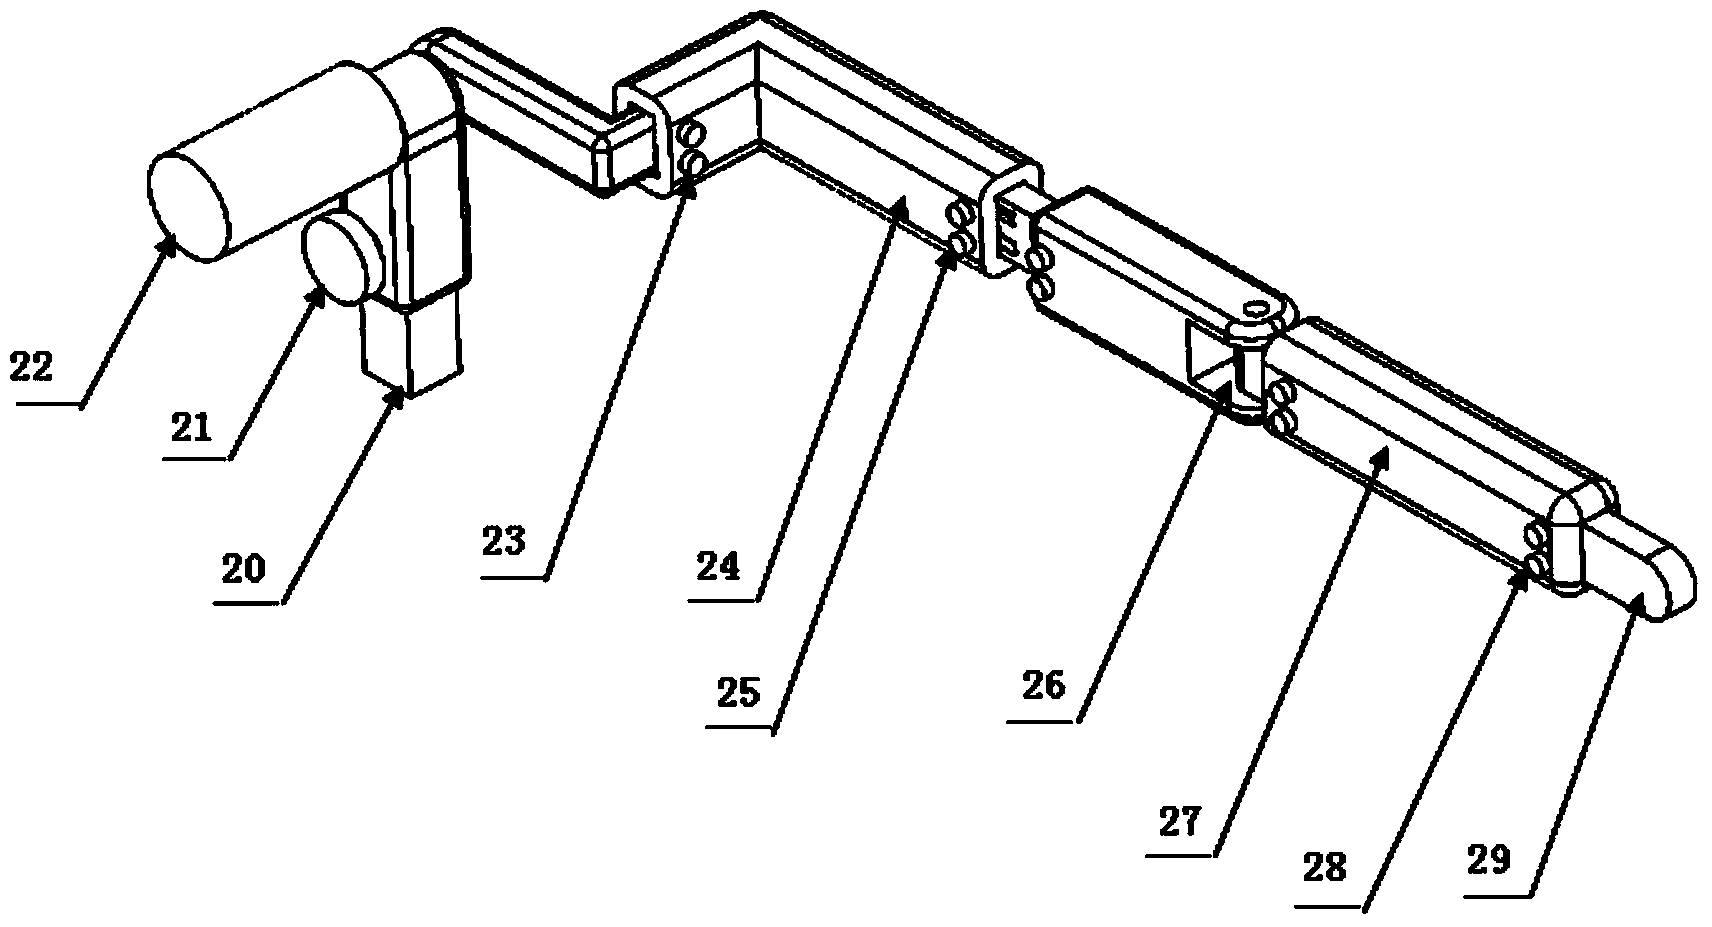 Multi-body-position rehabilitation robot with linkage of upper limbs and lower limbs